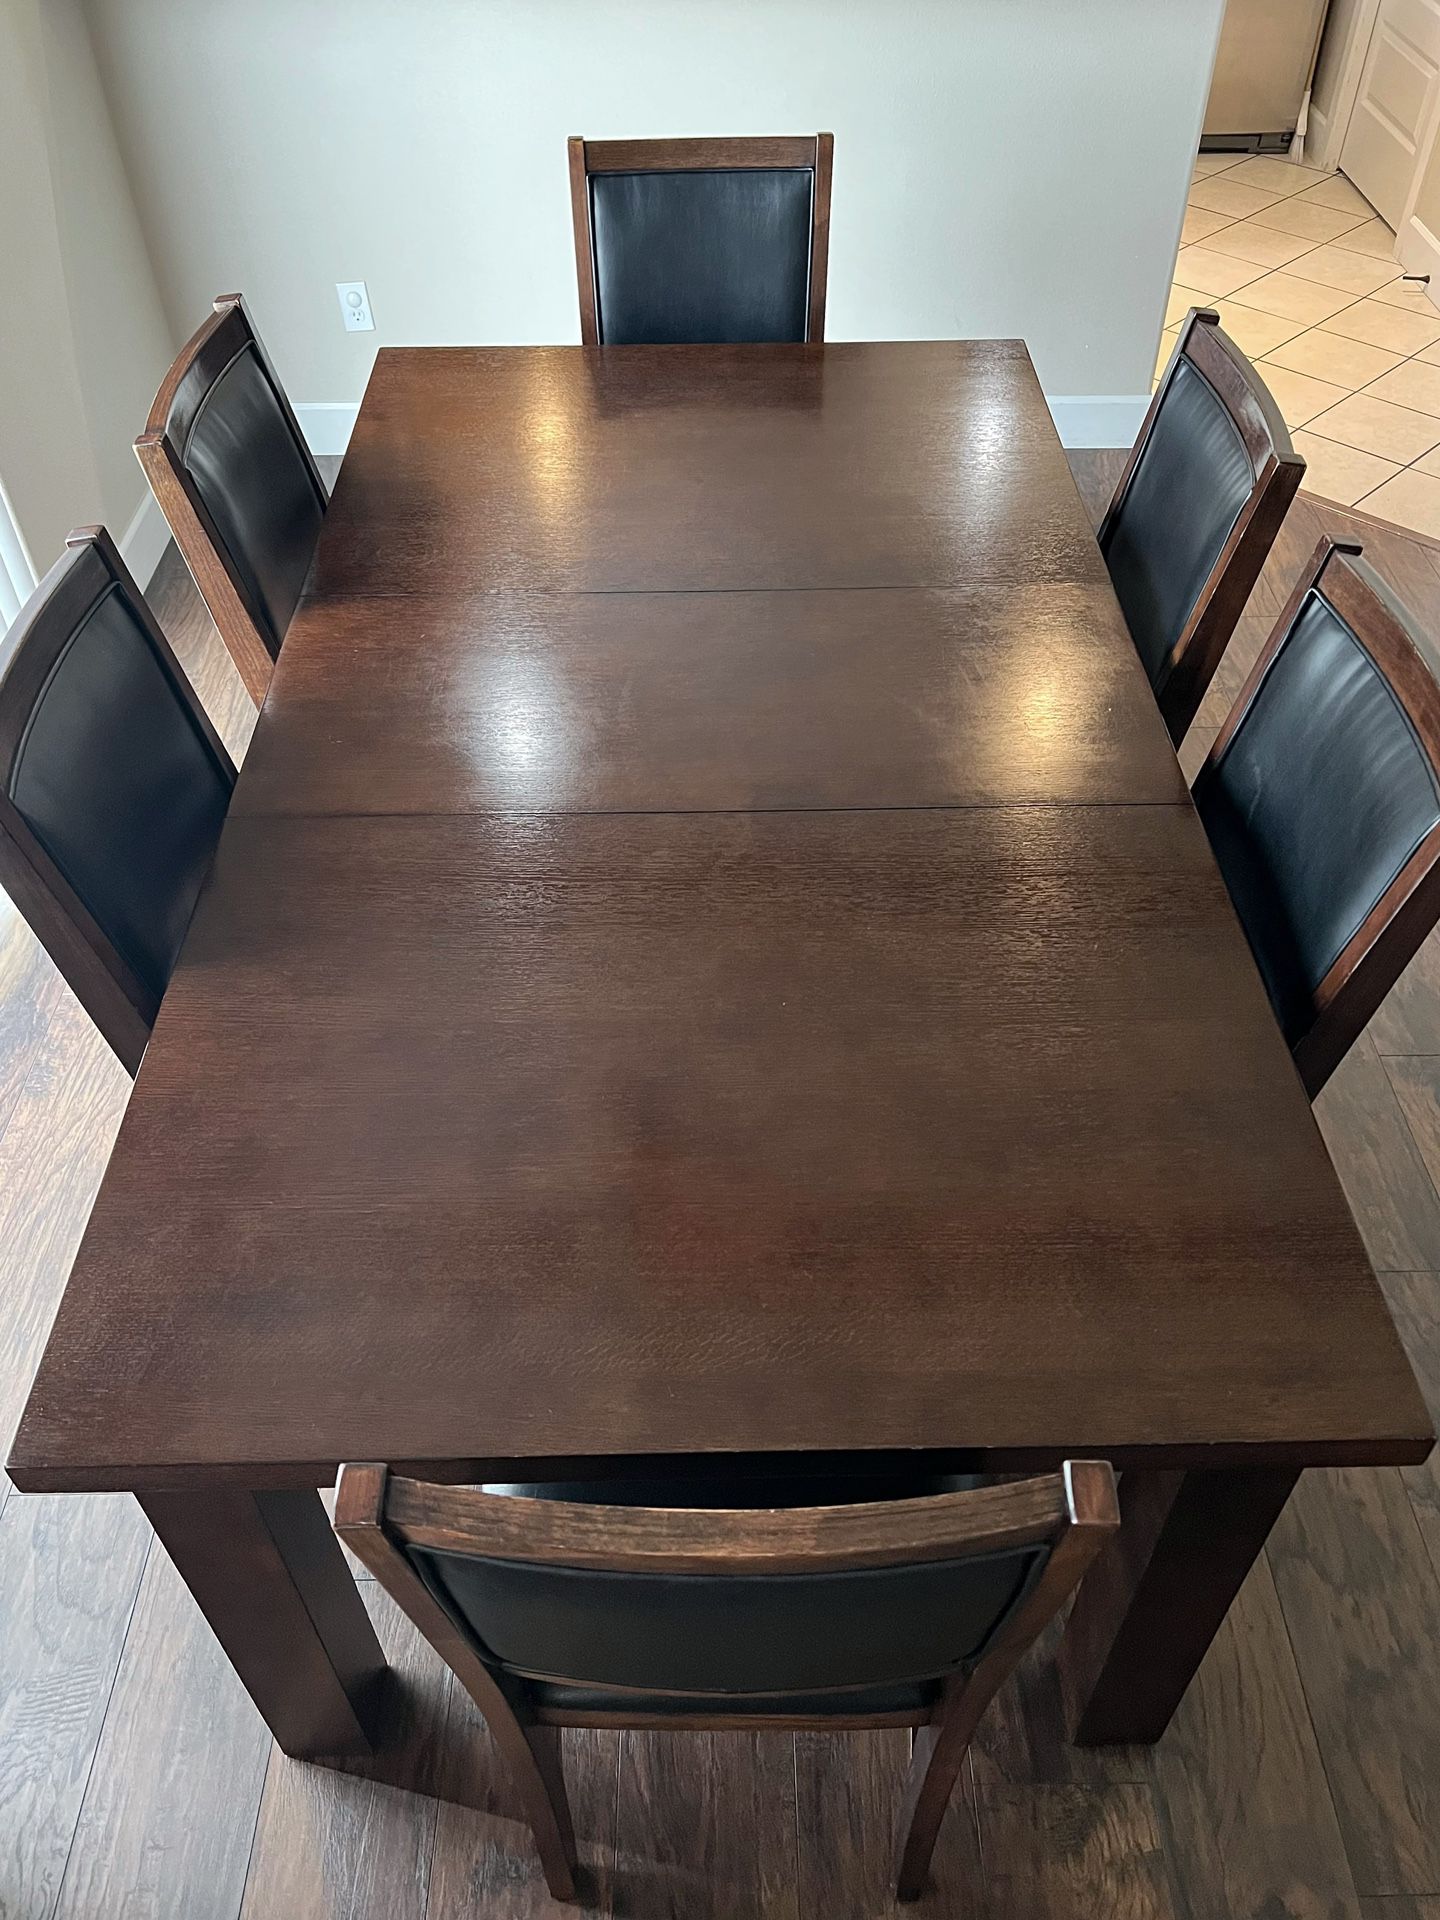 Solid Wood Dining Table With Chairs 